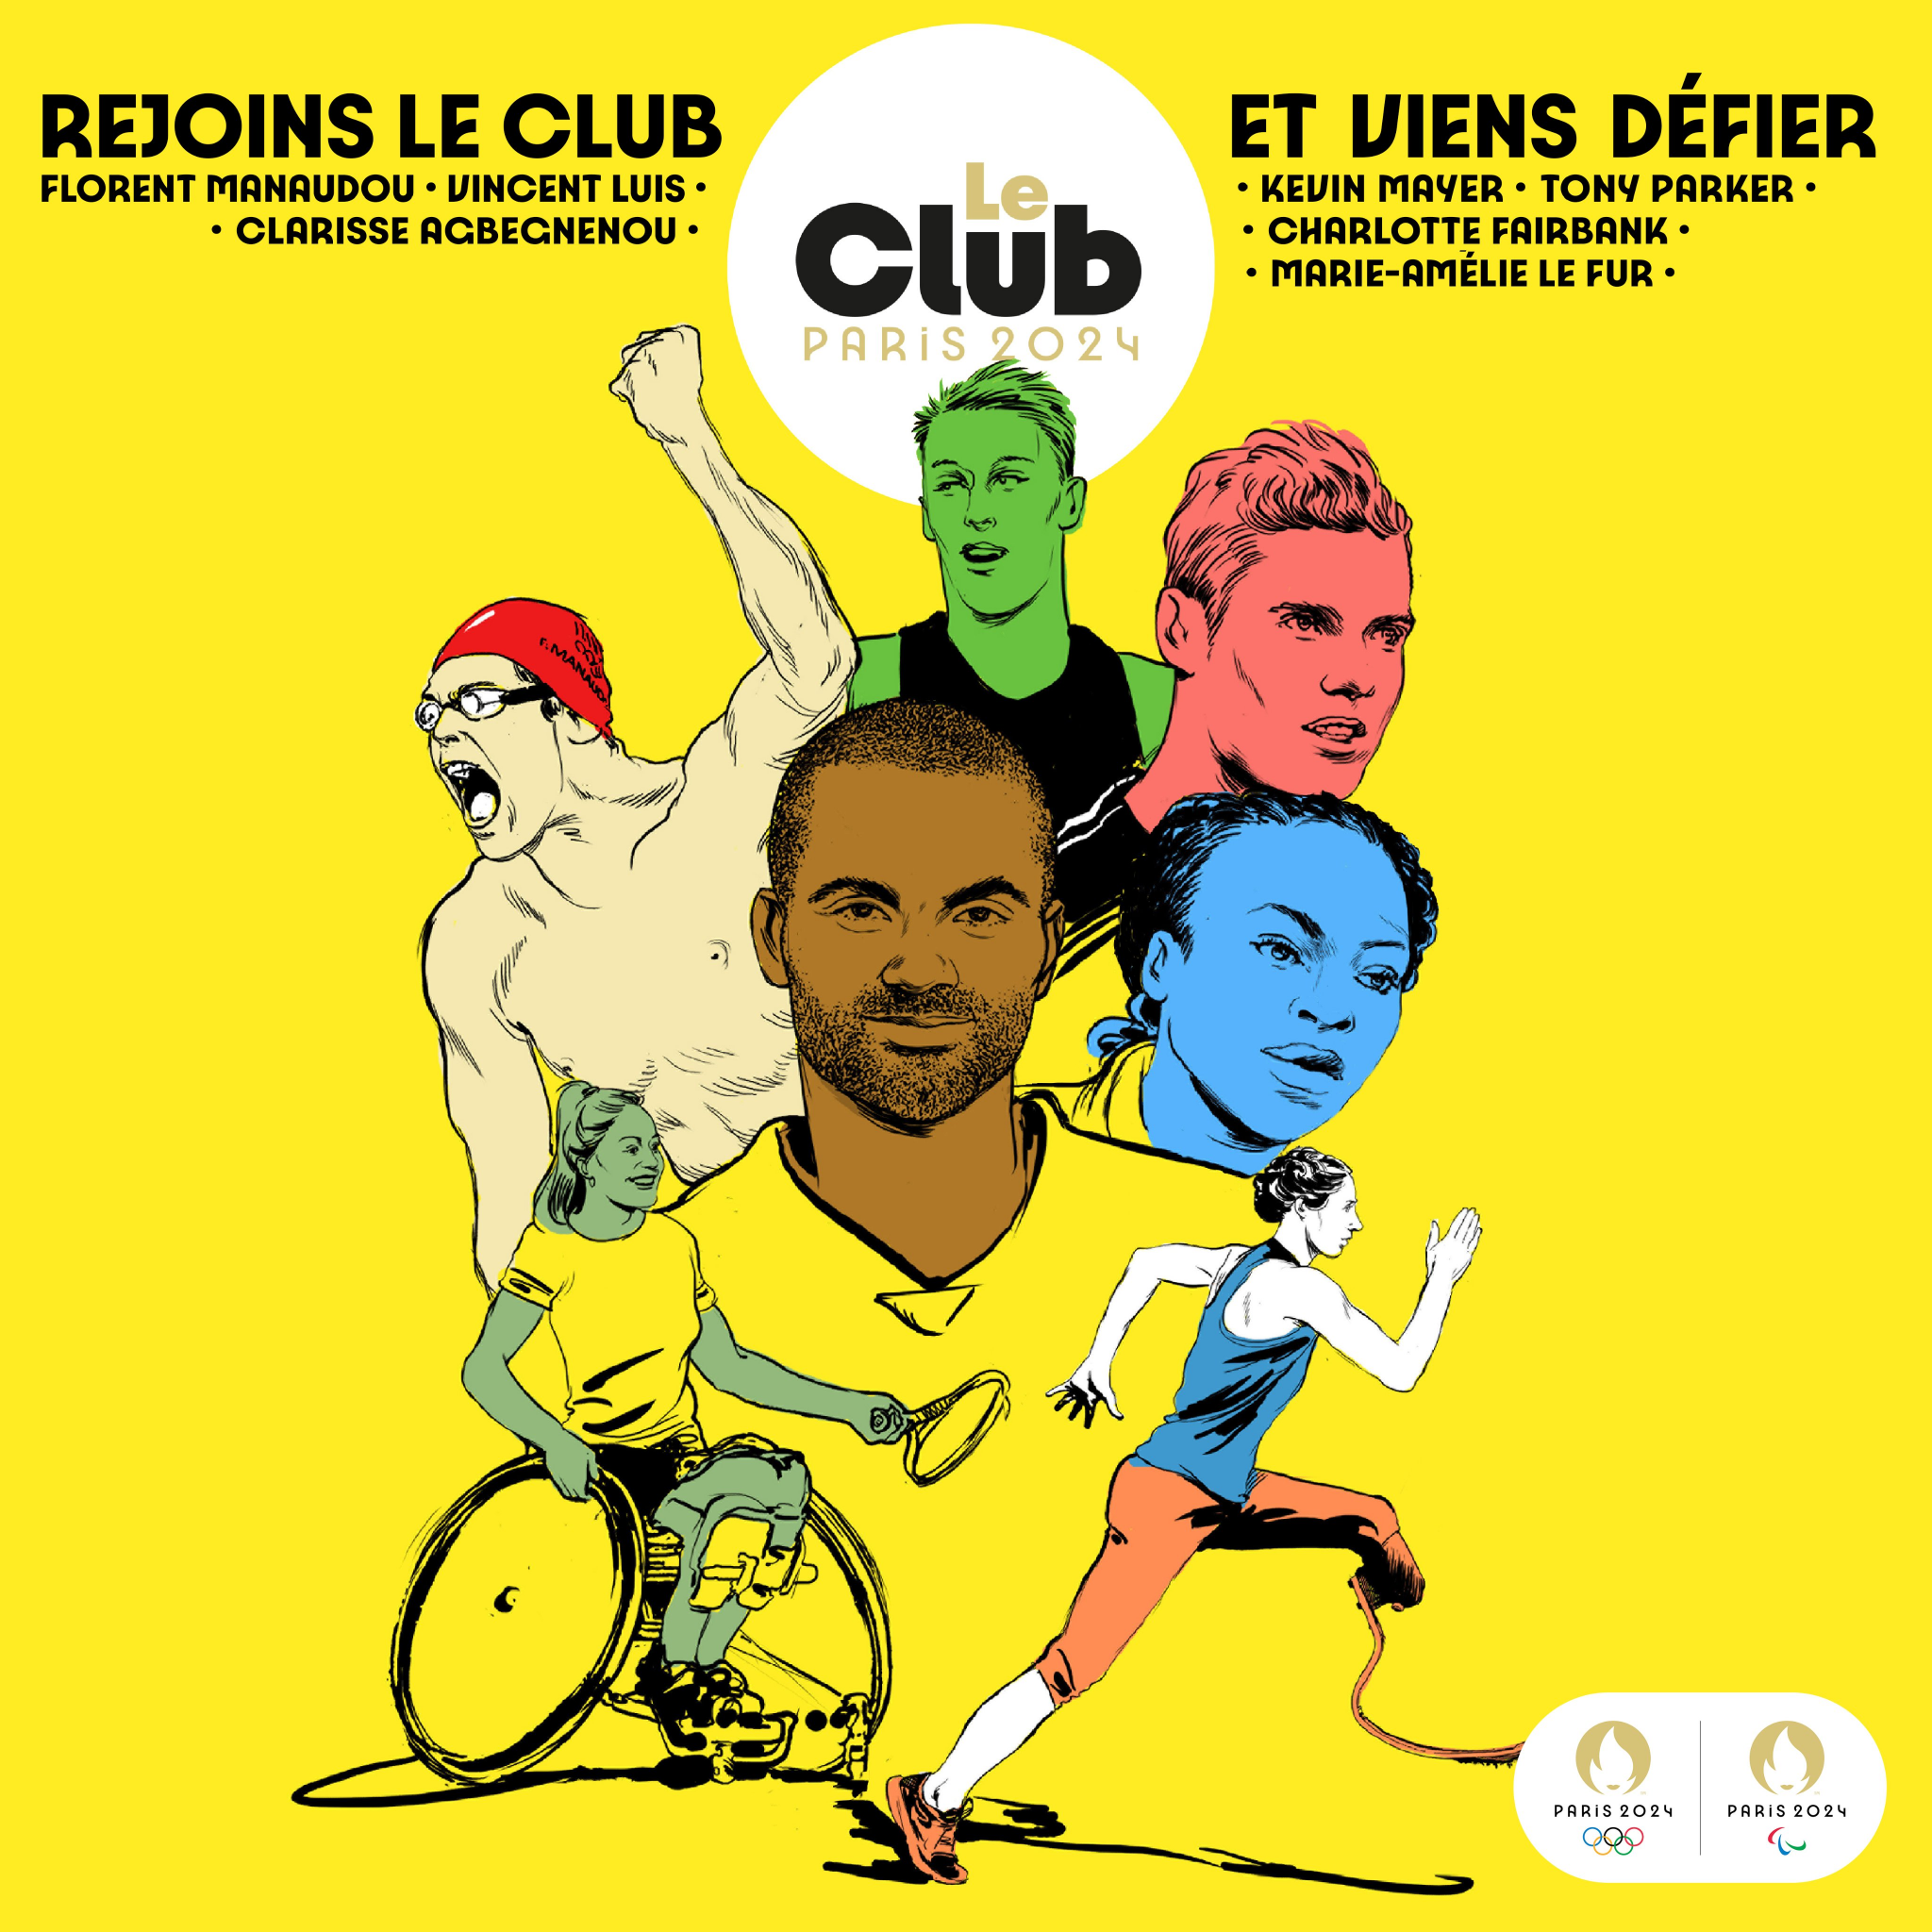 Club Paris 2024 launched with French sports stars to face public in challenges